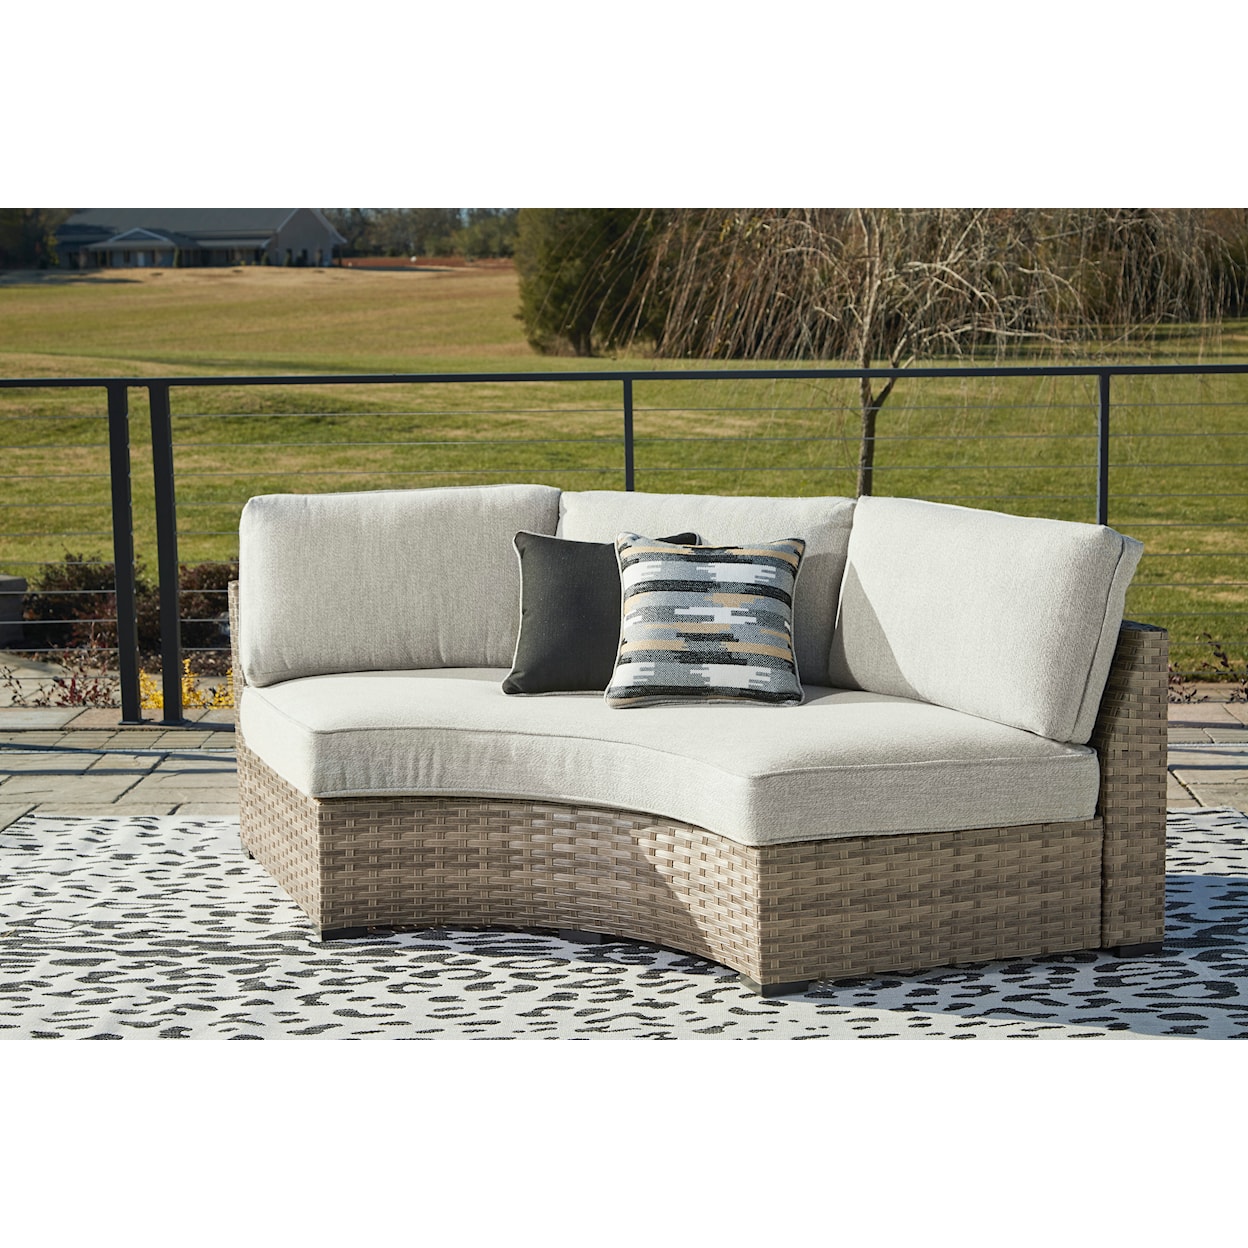 Ashley Furniture Signature Design Calworth Outdoor Curved Loveseat with Cushion